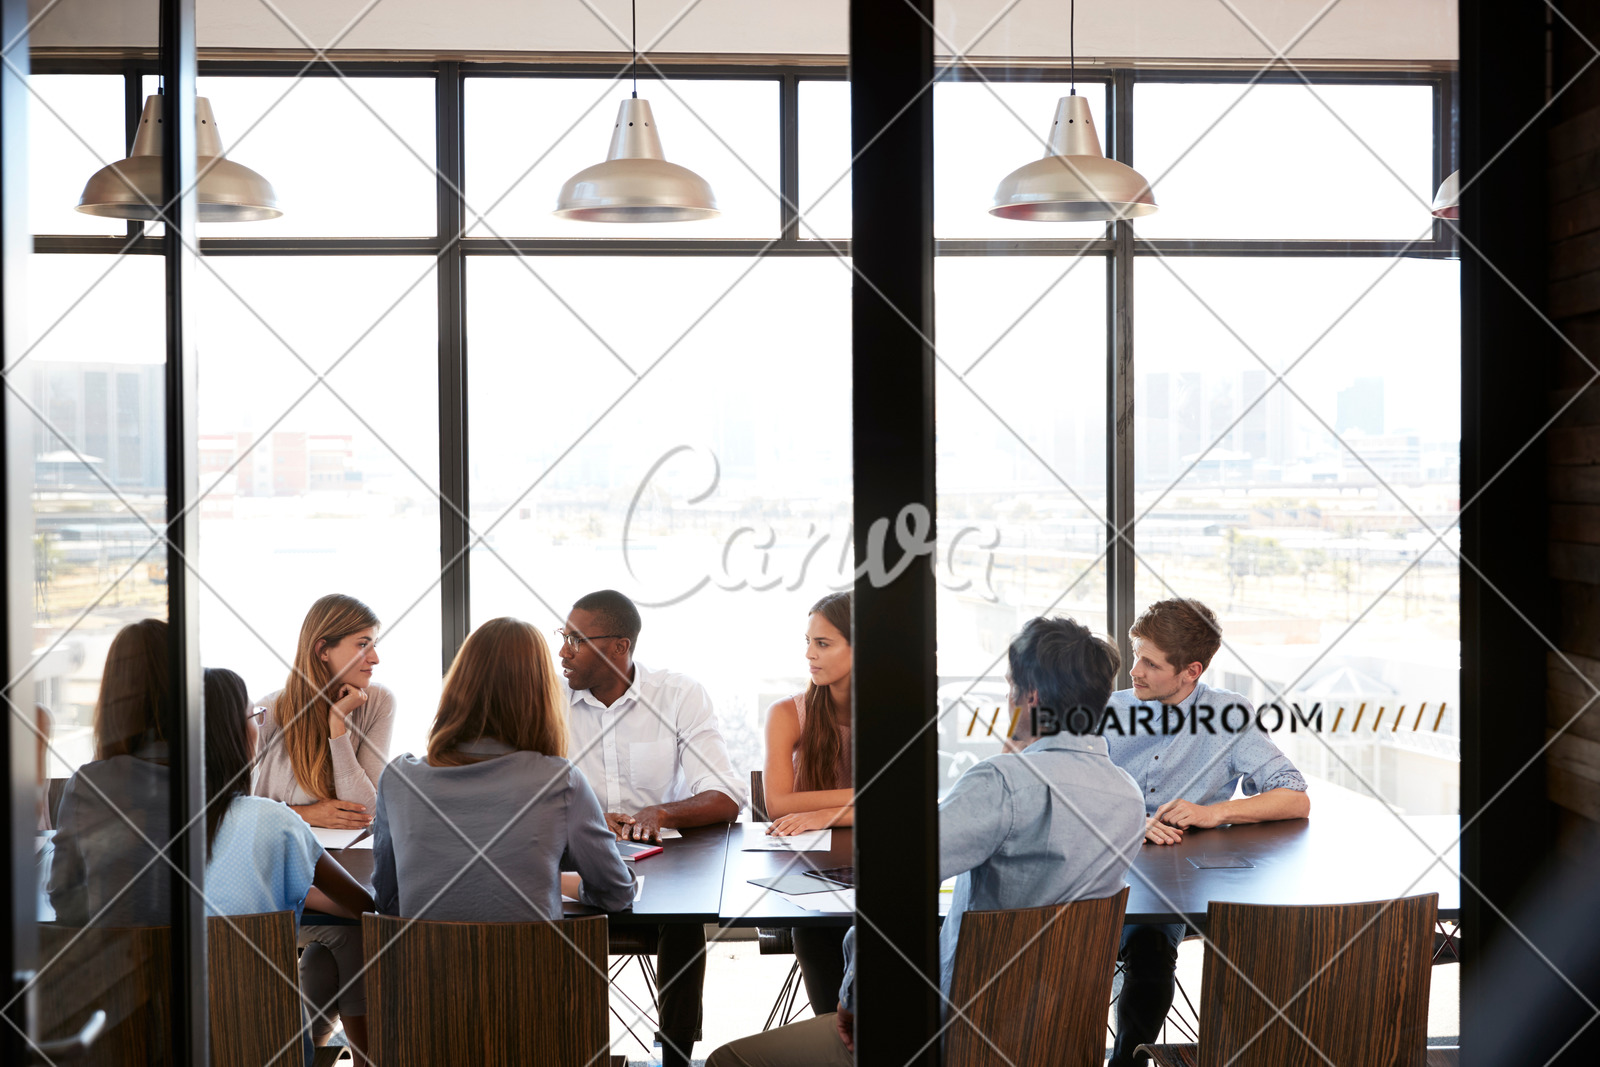 Team In A Business Boardroom Meeting Photos By Canva